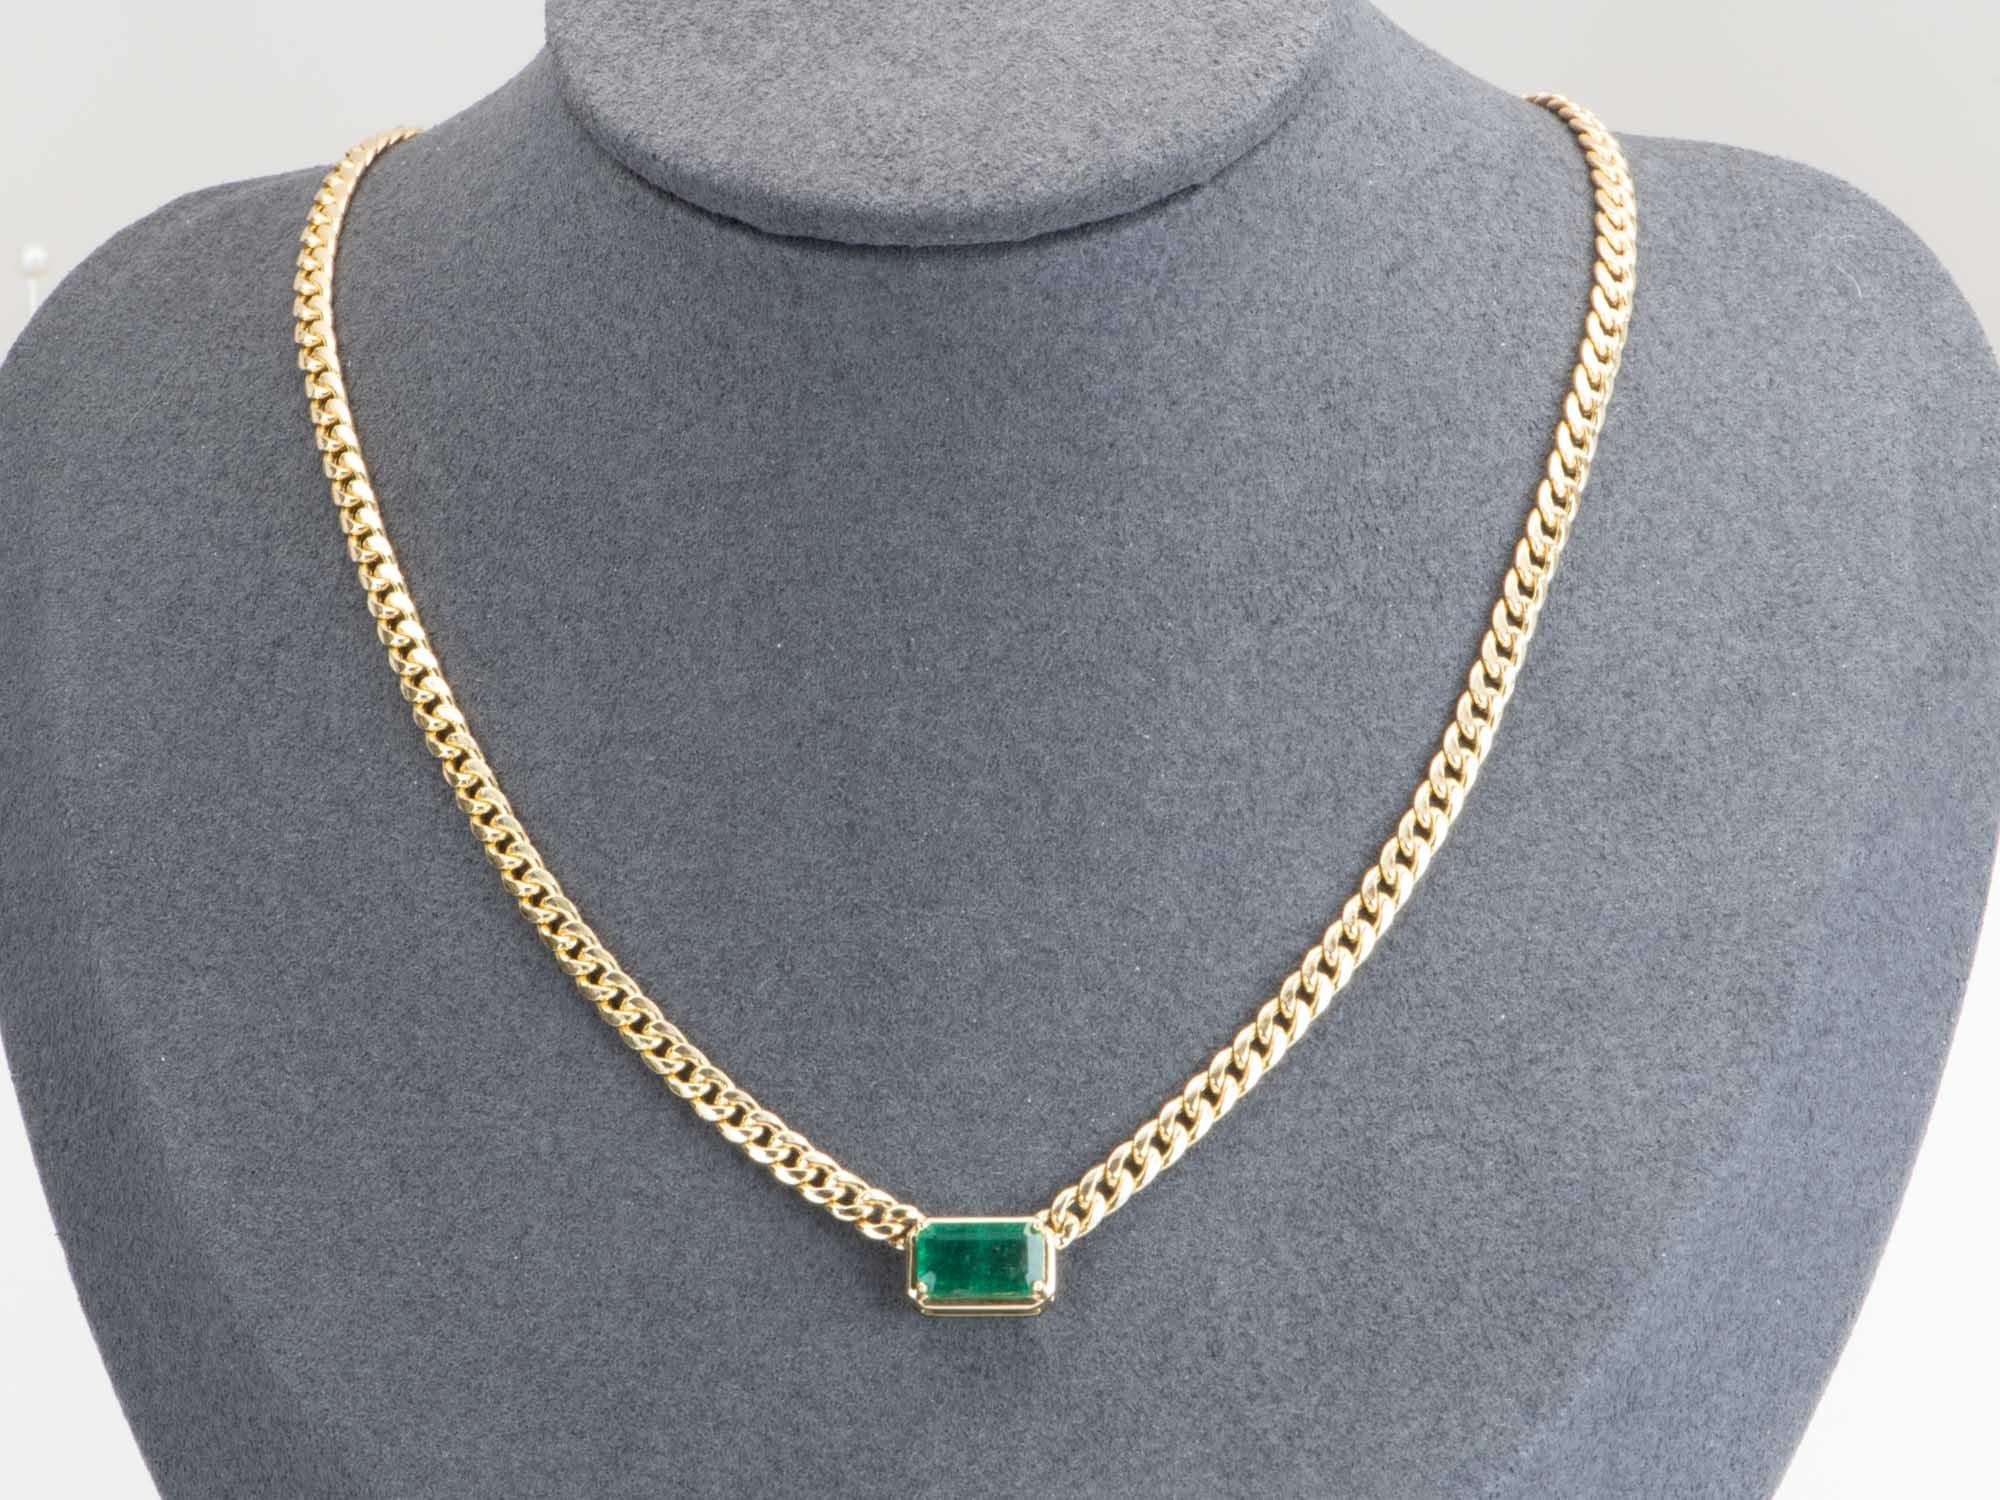   This stunning 2.15ct Emerald Choker Necklace will have heads turning. The perfect complement to any outfit, this fashionable designer piece is crafted from 14K gold, featuring a show-stopping east west set emerald set on a gorgeous Miami Cuban